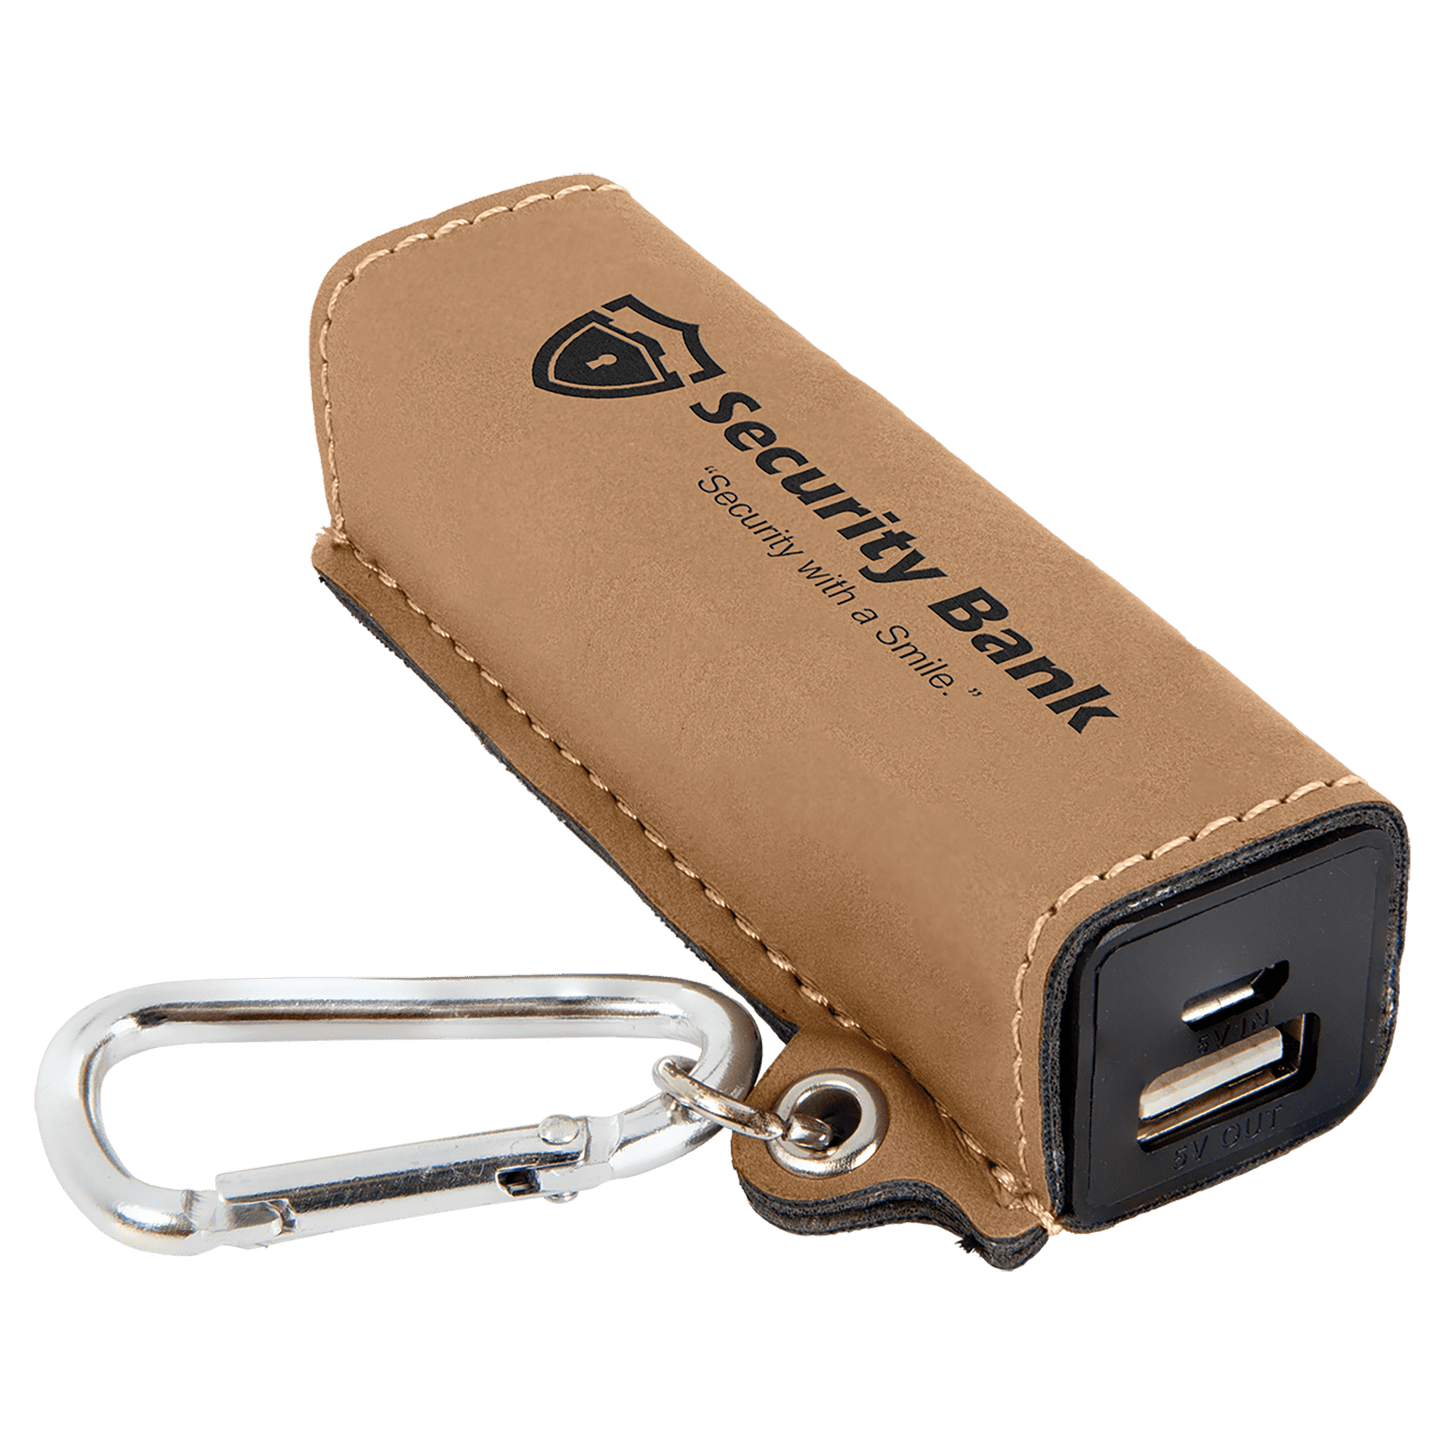 Custom Engraved Power Bank with USB Cord | Portable Cell Phone Travel Charger | Personalized Gifts | Gifts for Travel | Gifts for Him